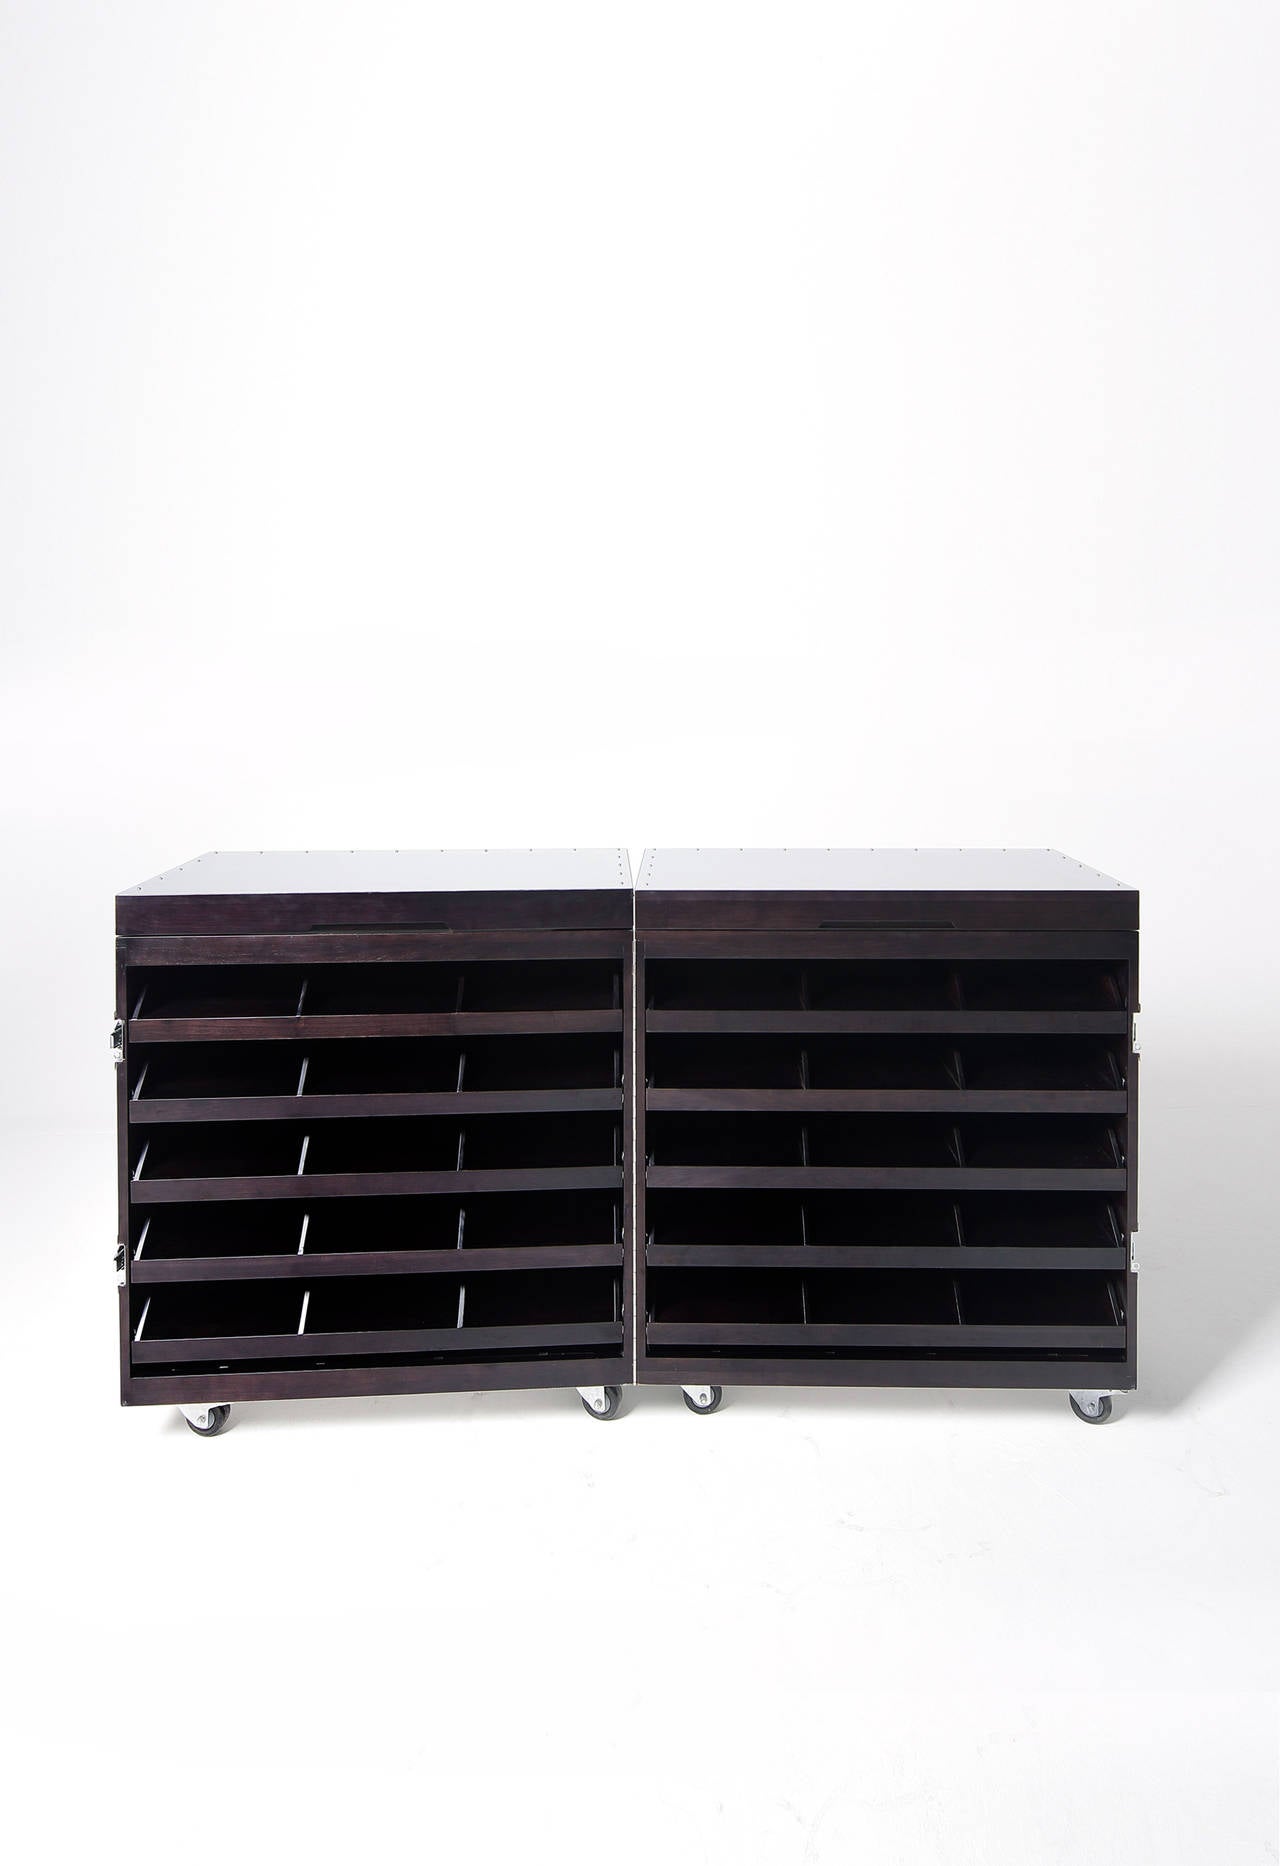 Chinese Expandable Shirt Chest in Black Walnut and Stainless Steel